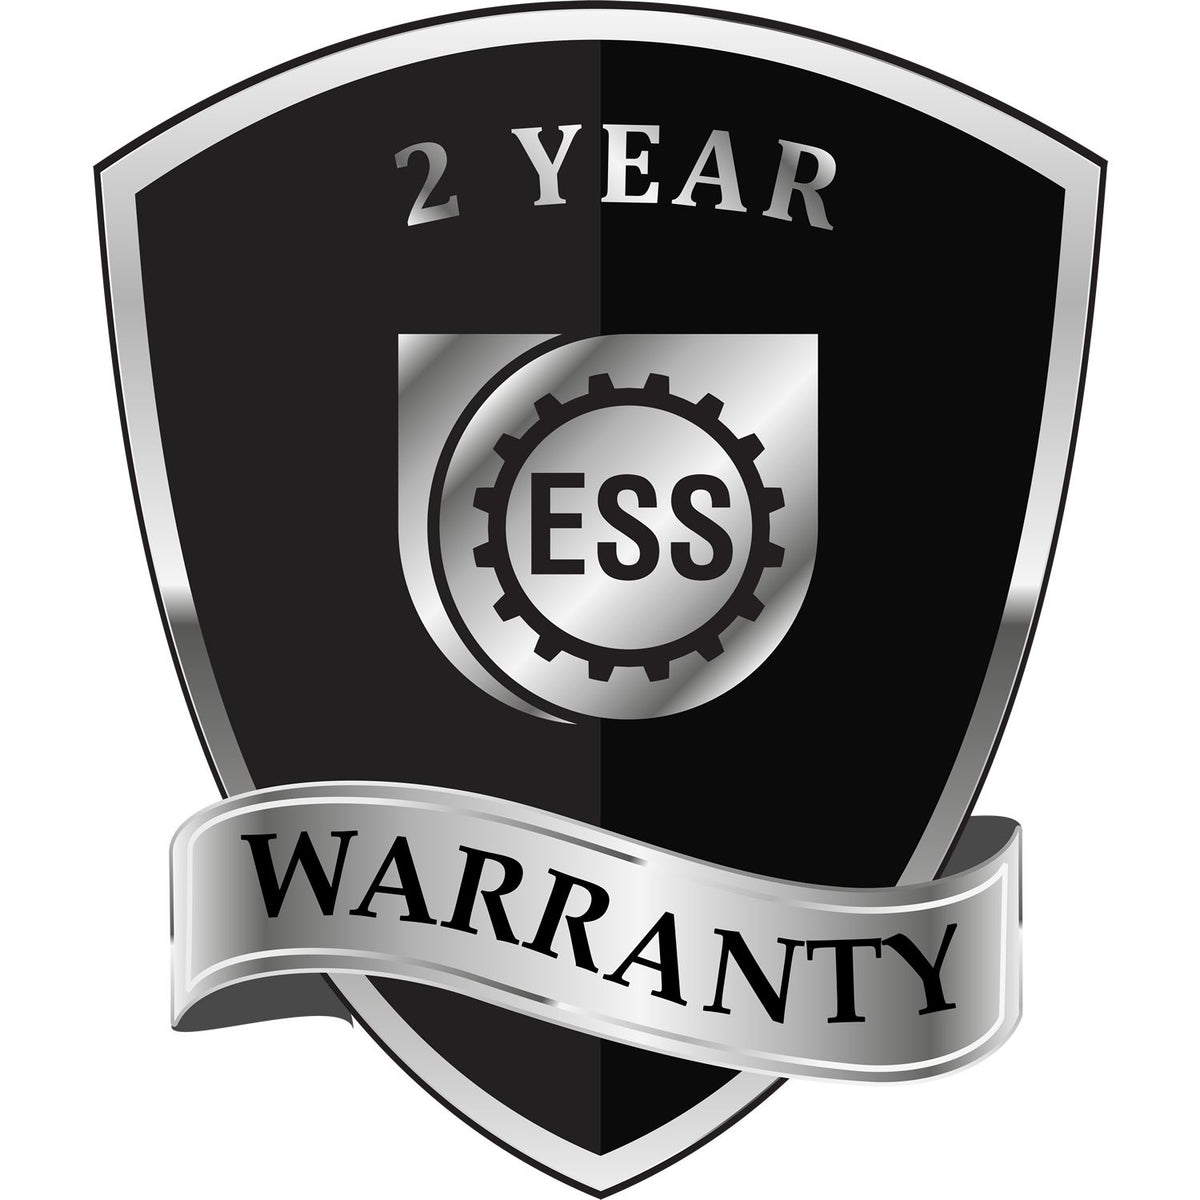 A badge or emblem showing a warranty icon for the State of Illinois Architectural Seal Embosser